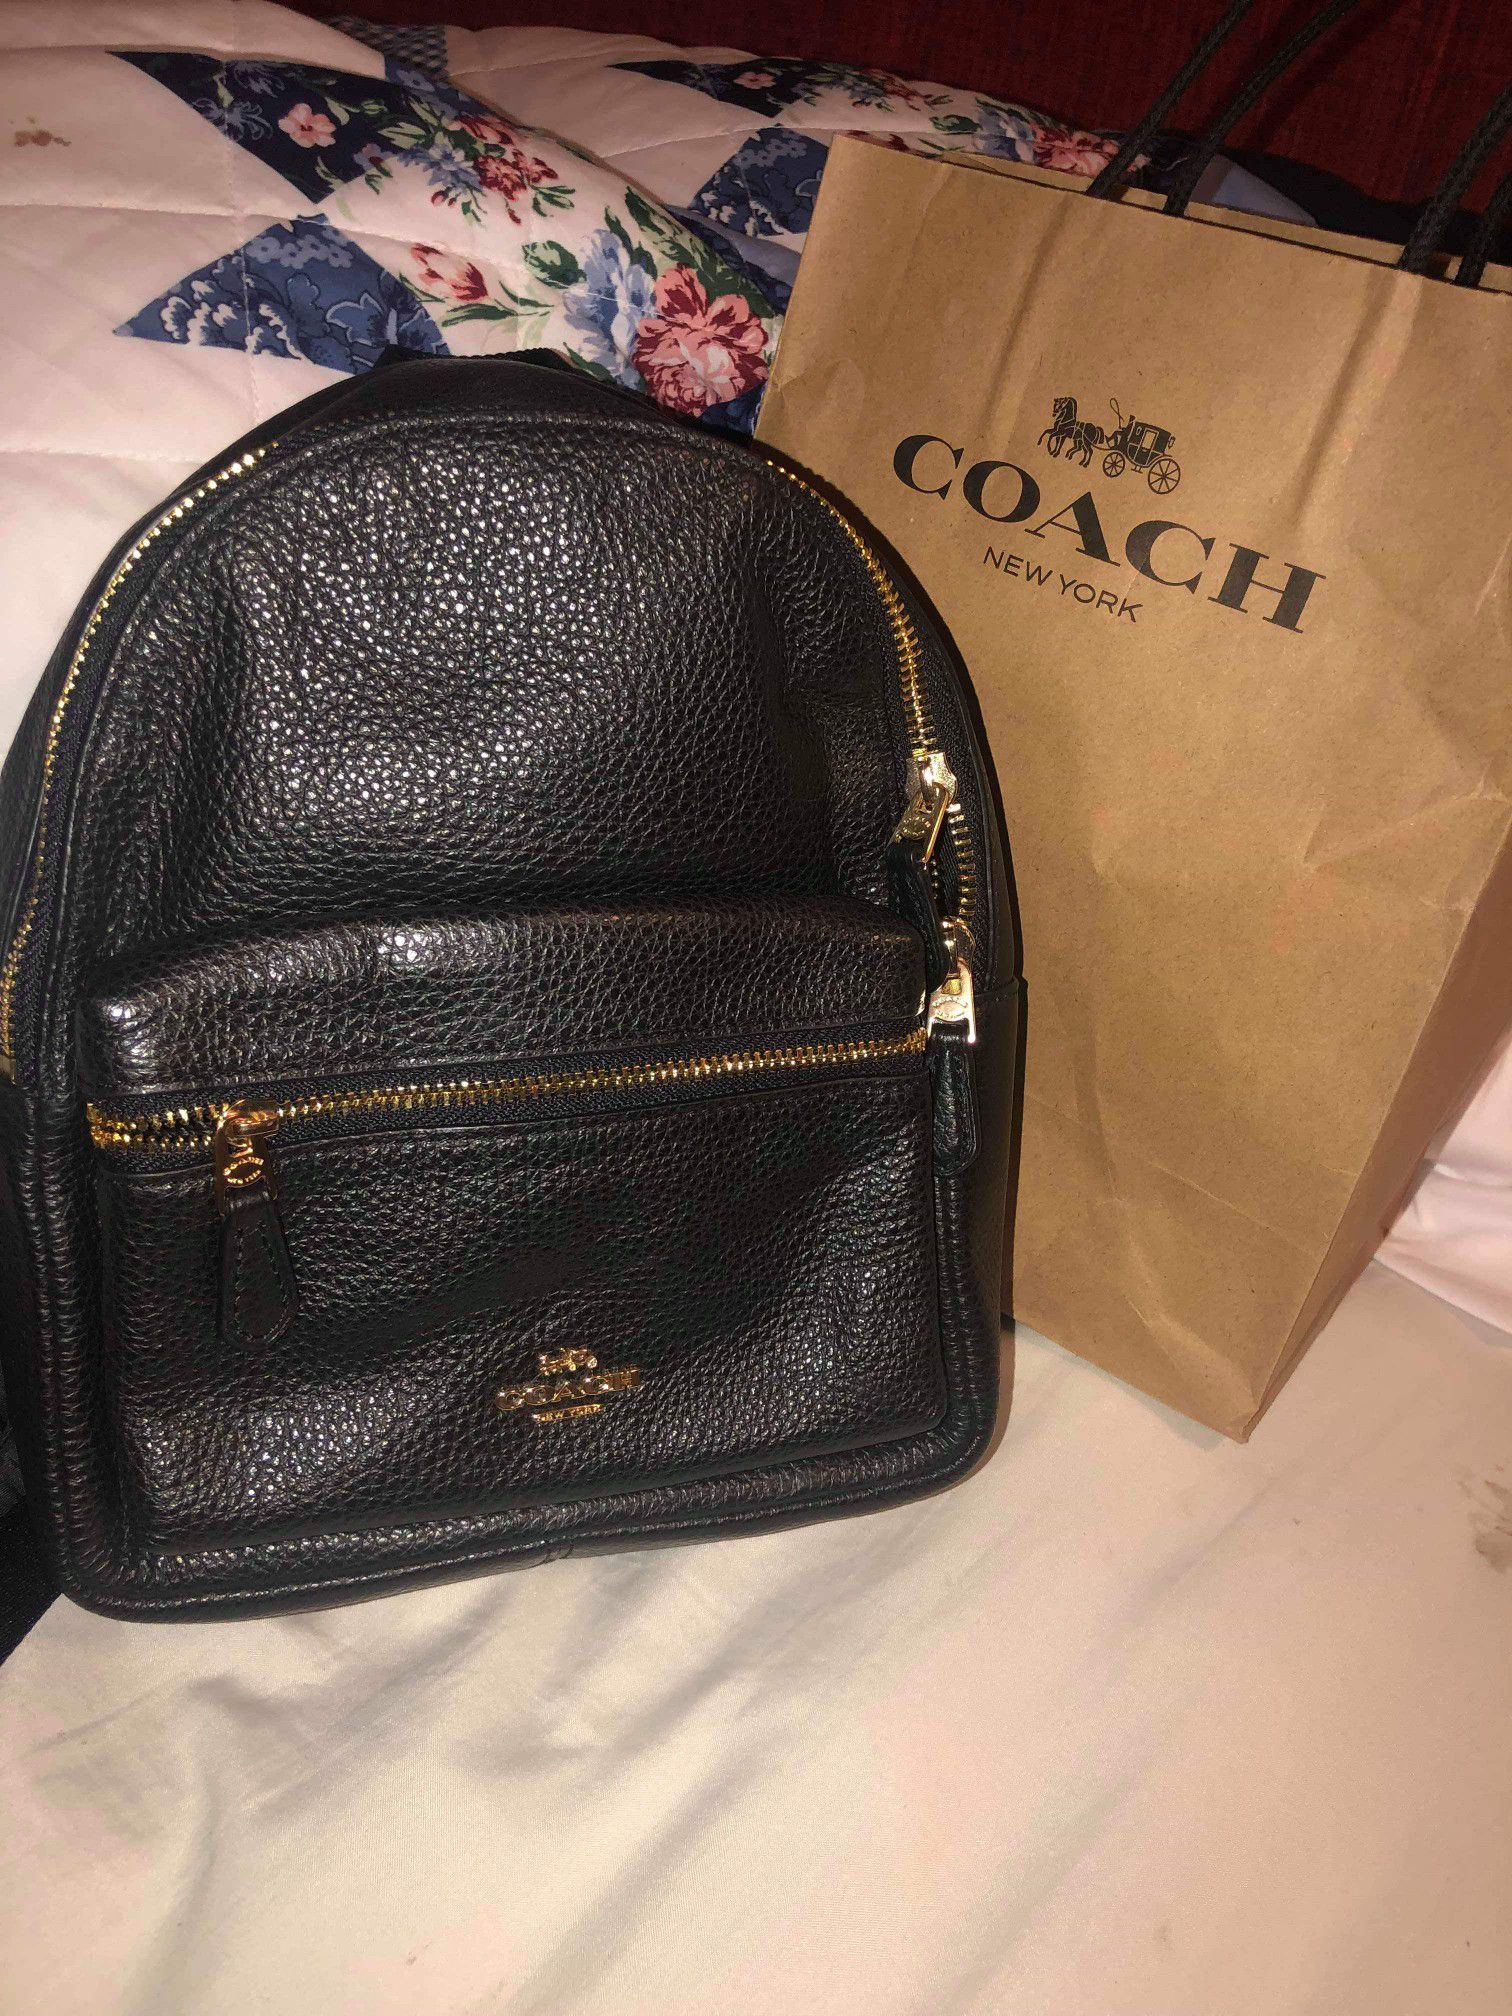 Brand new black leather Coach mini backpack with tags